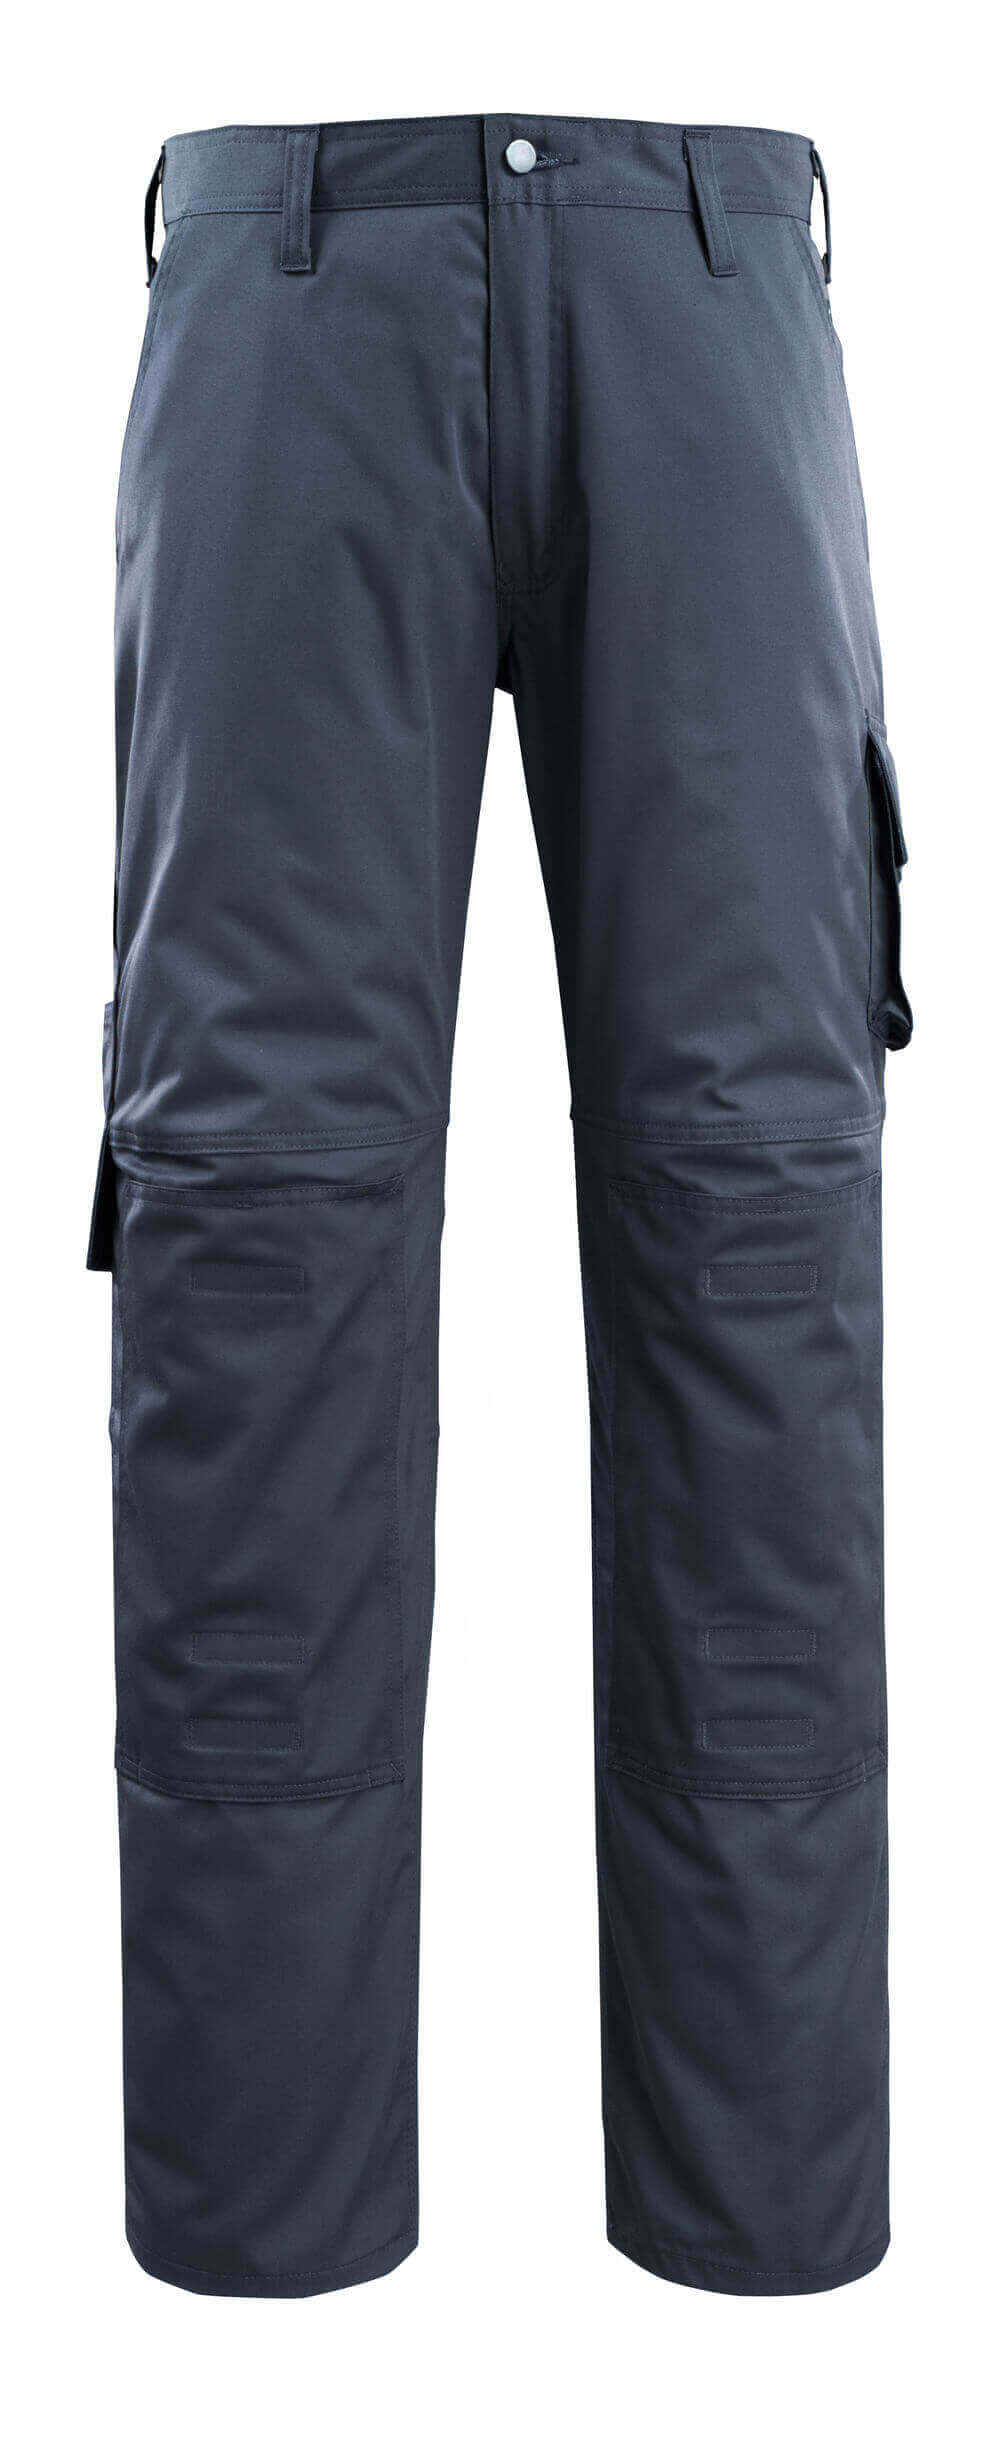 MACMICHAEL® WORKWEAR Trousers with kneepad pockets 14379